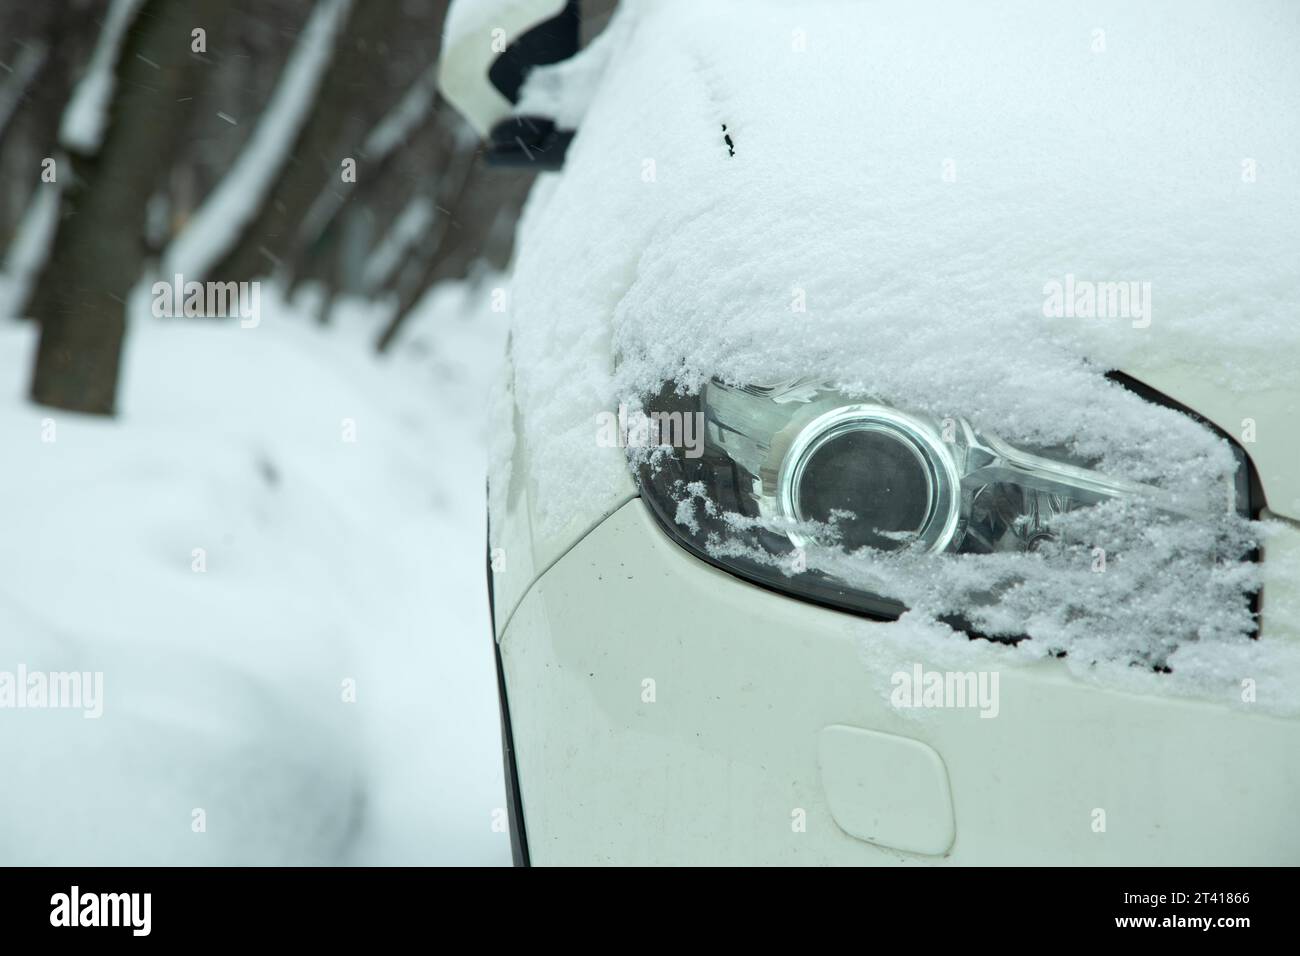 car headlight with lens xenon light covered with snow in winter weather, snowdrifts on the road. close-up of a vehicle detail. Stock Photo